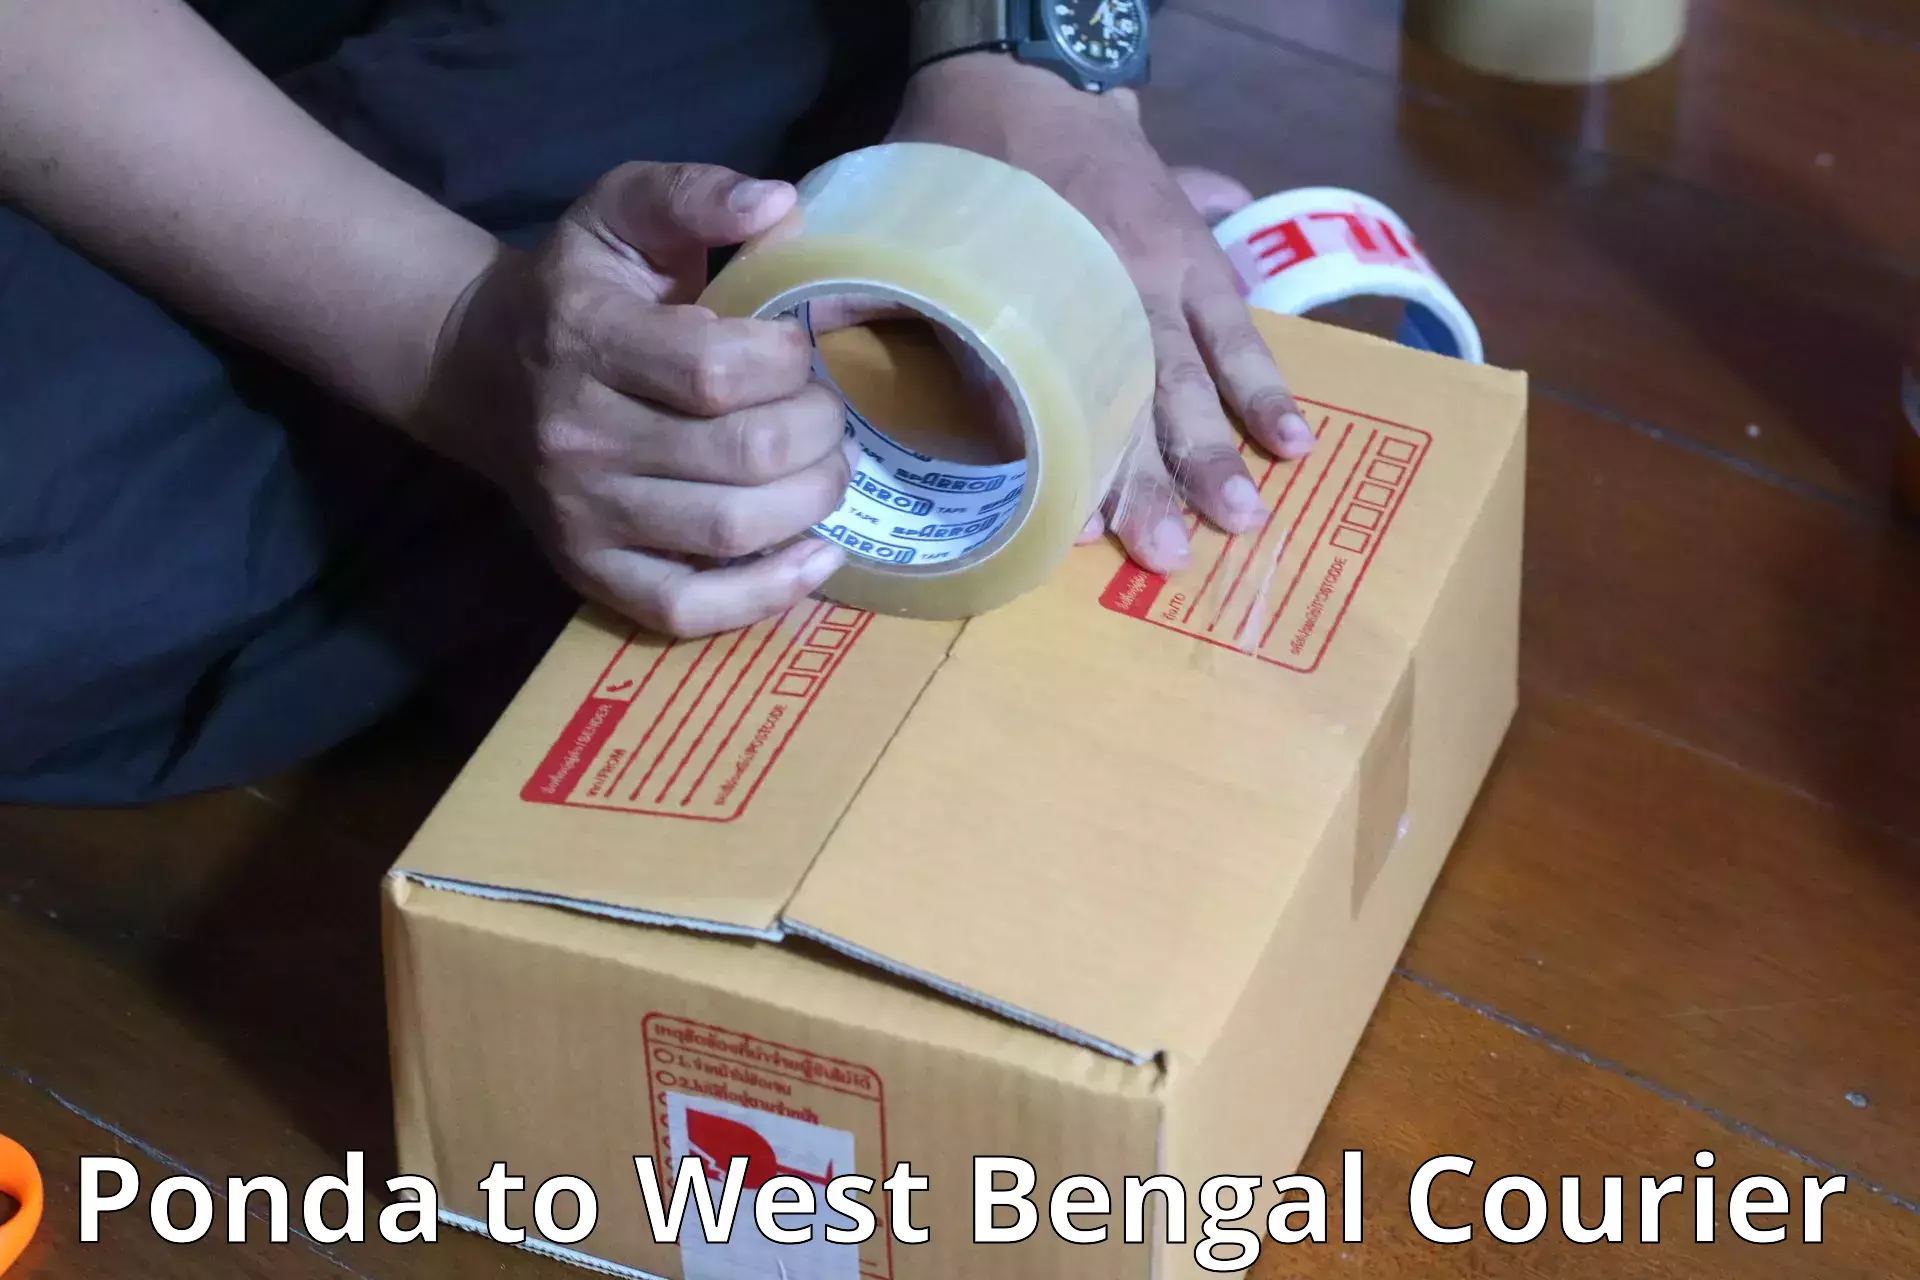 Personal effects shipping in Ponda to Kalimpong